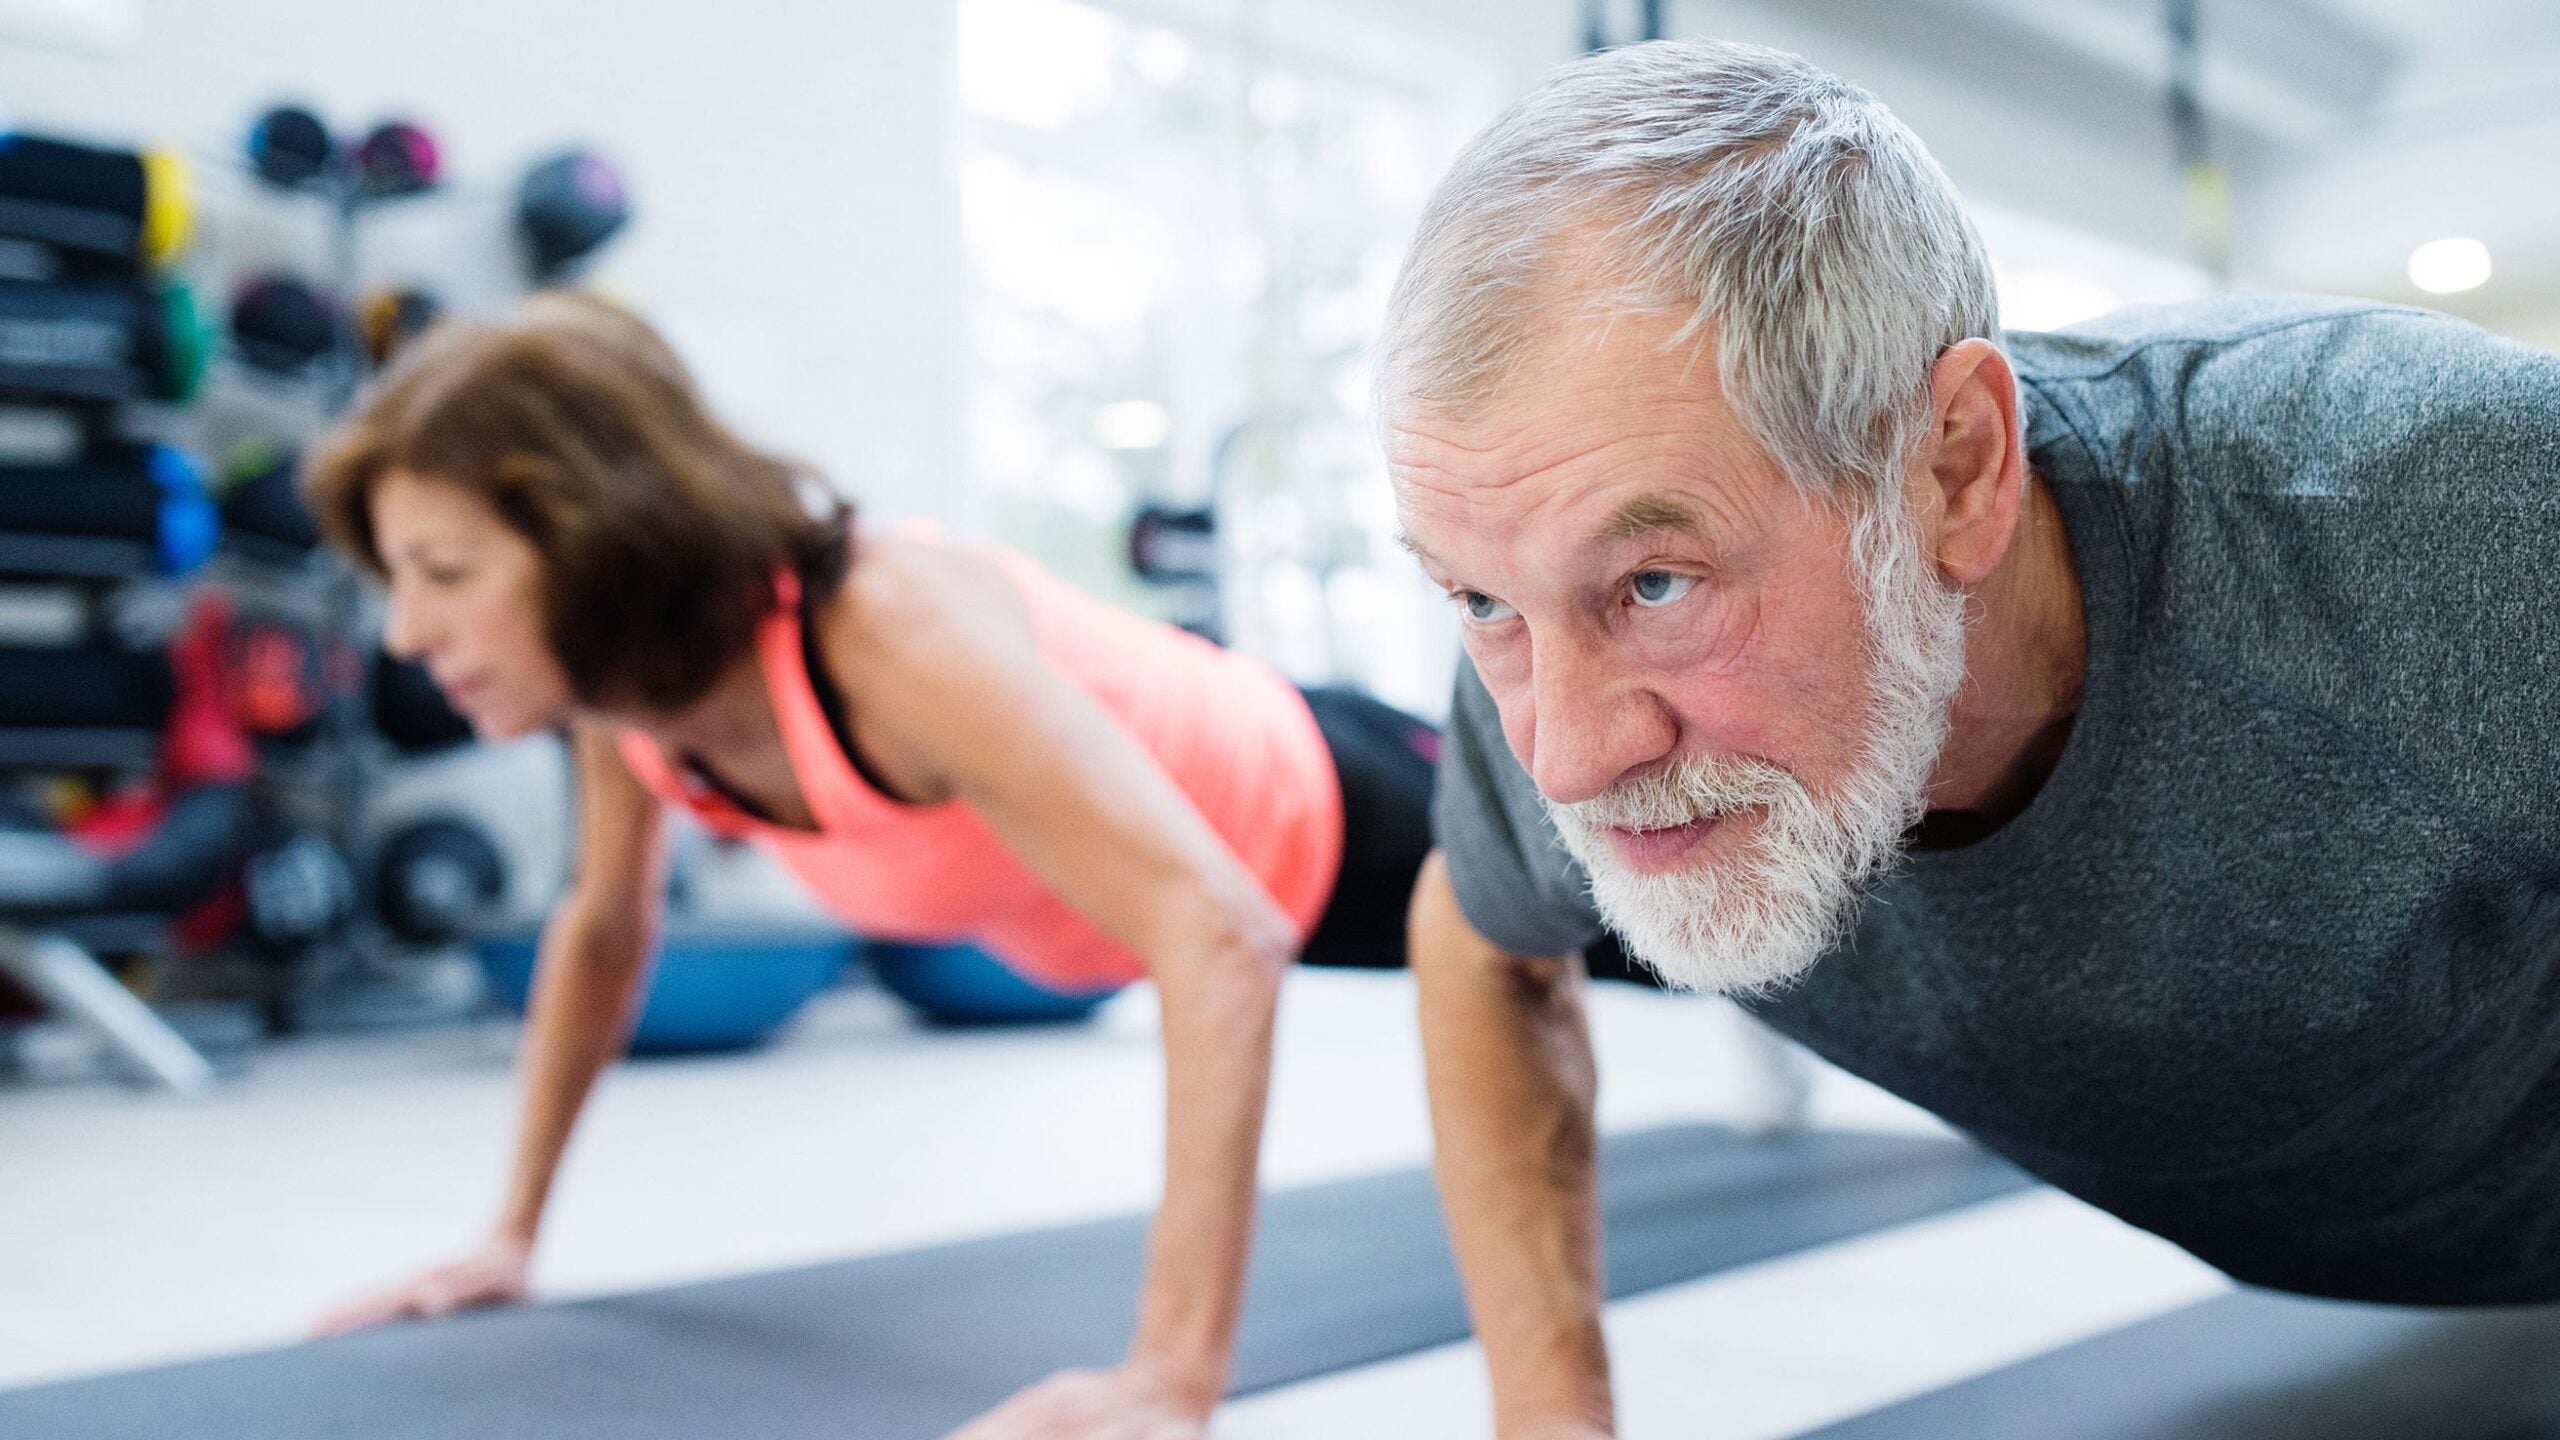 Study On Aging Athletes: It's Never Too Late To Begin Strength Training